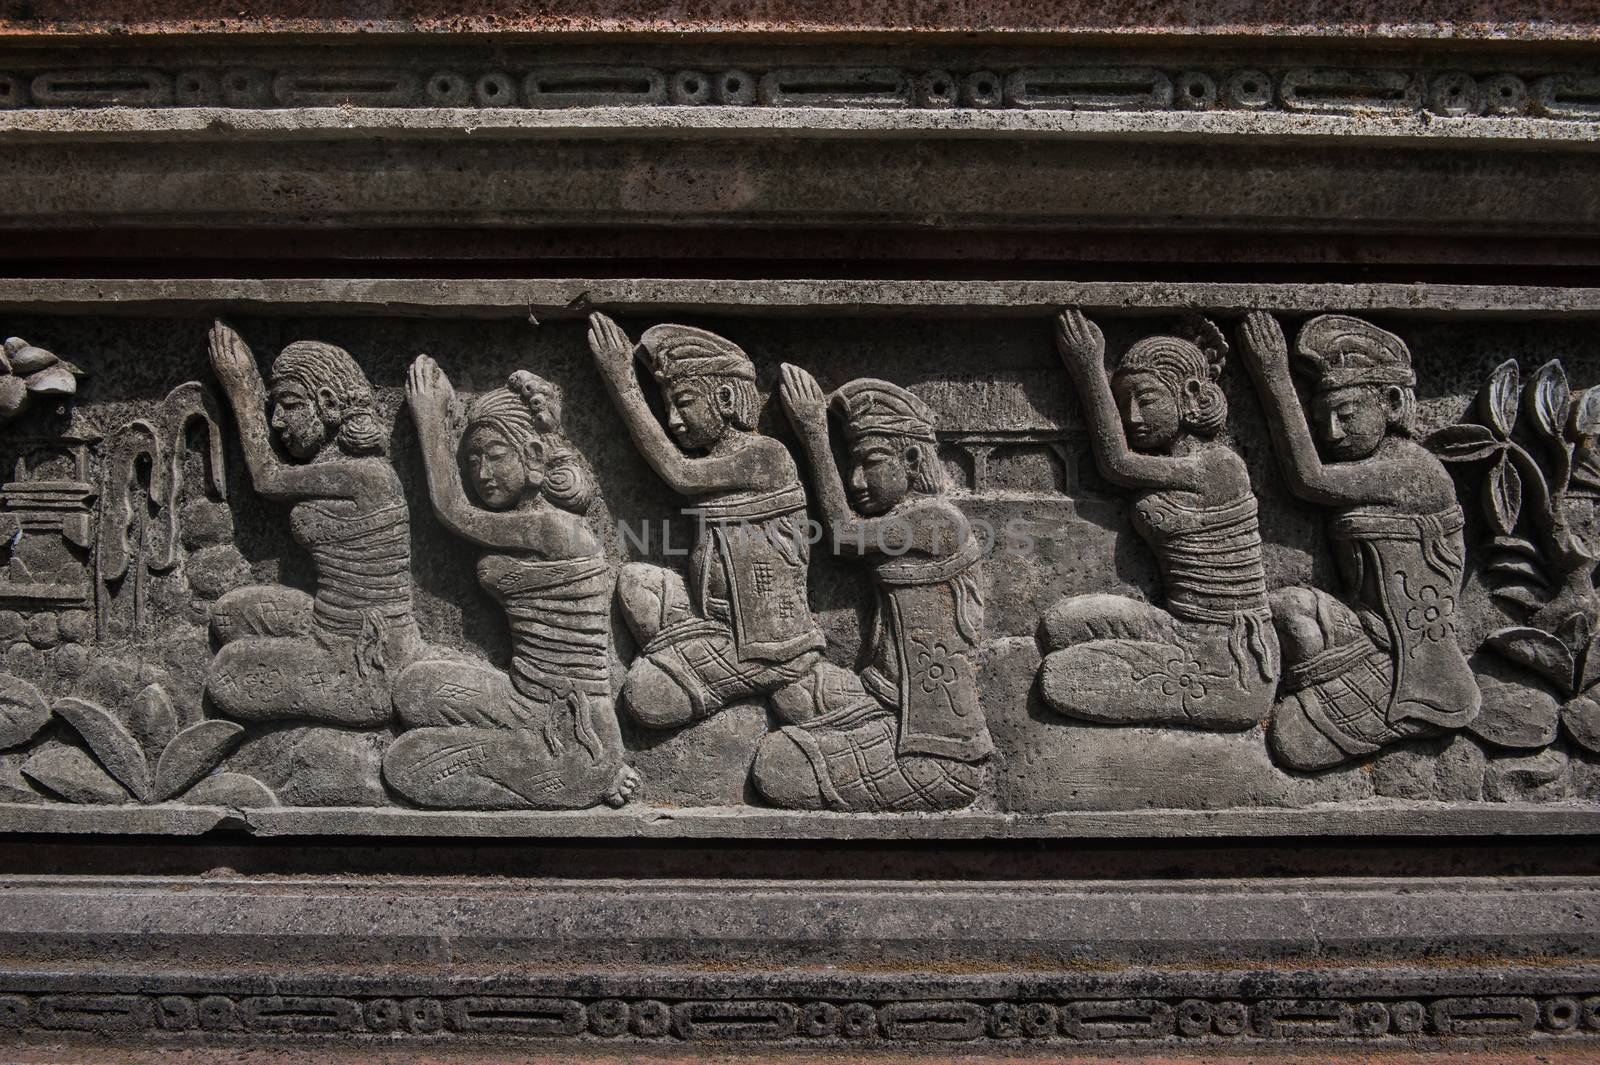 Traditional Hindu sculpturing, showing the ceremony of worshiping of Balinese prayers.